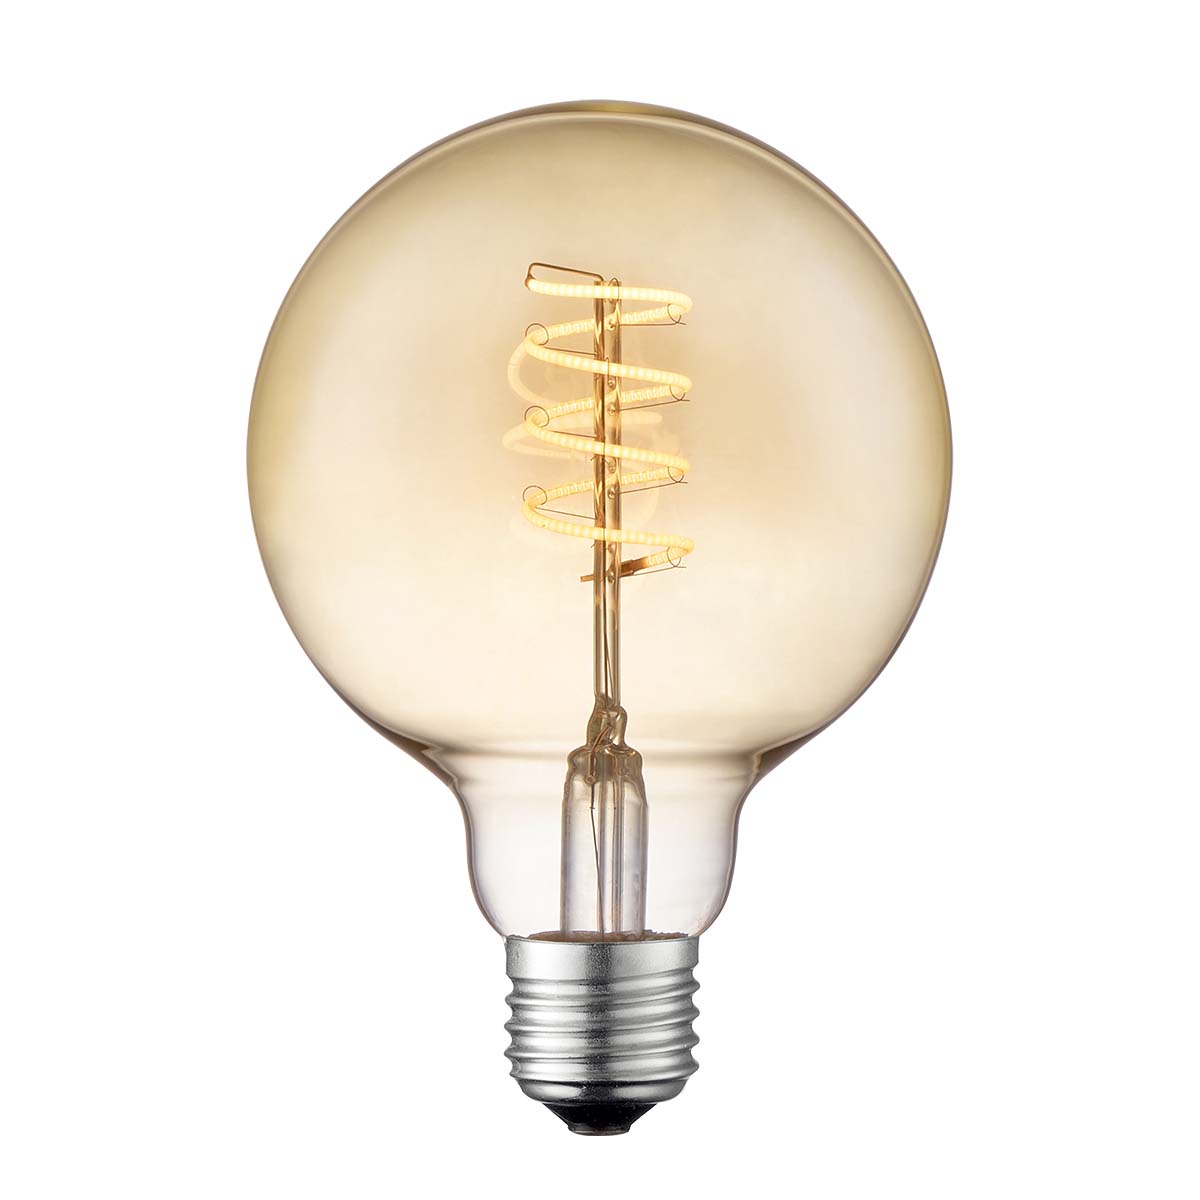 Tangla lighting - TLB-8008-04AM - LED Light Bulb Double Spiral filament - G95 4W amber - dimmable - E27